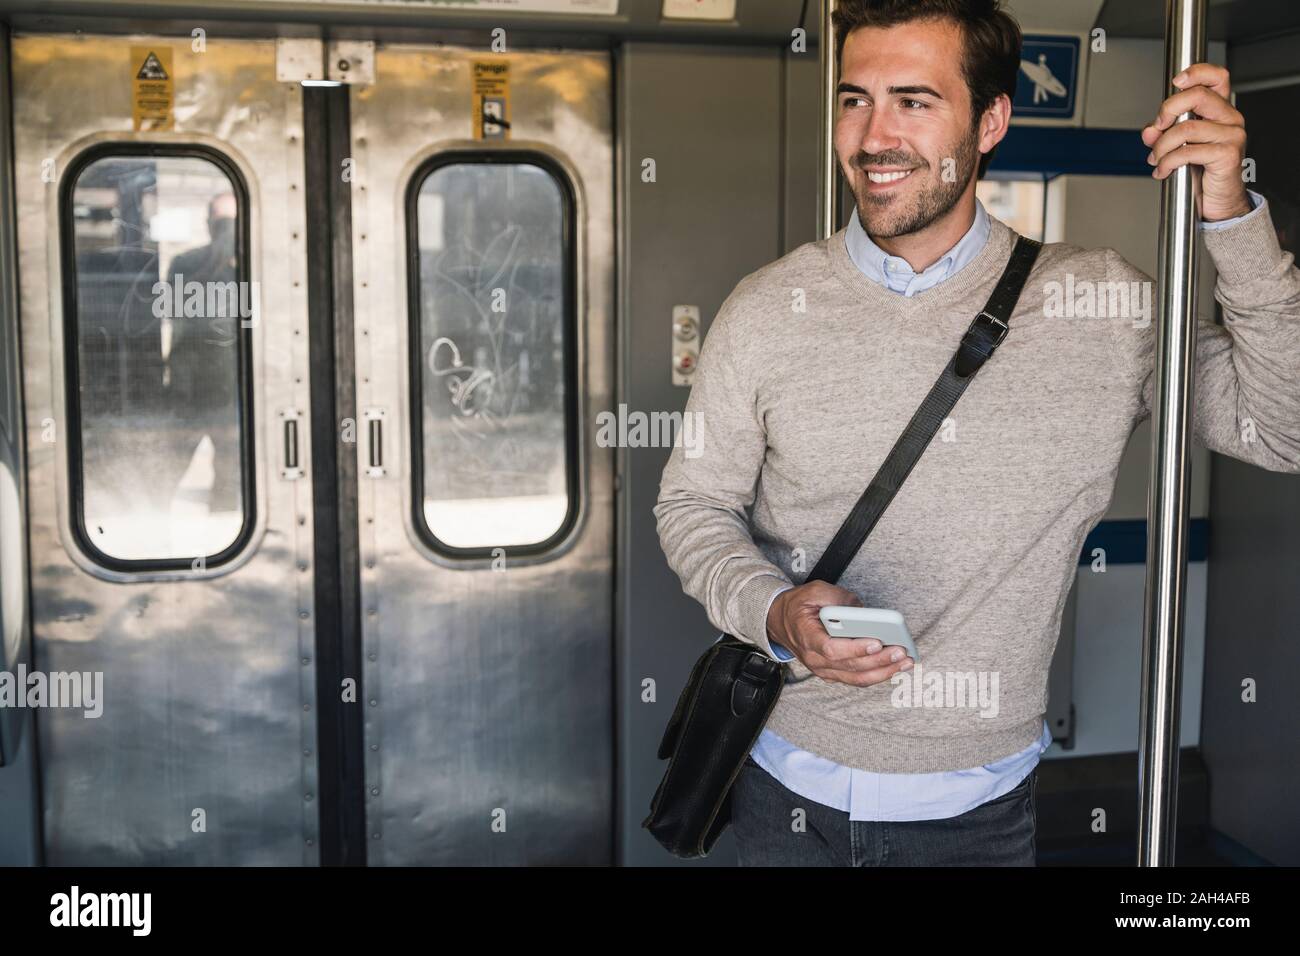 Smiling young man with smartphone on a train Stock Photo